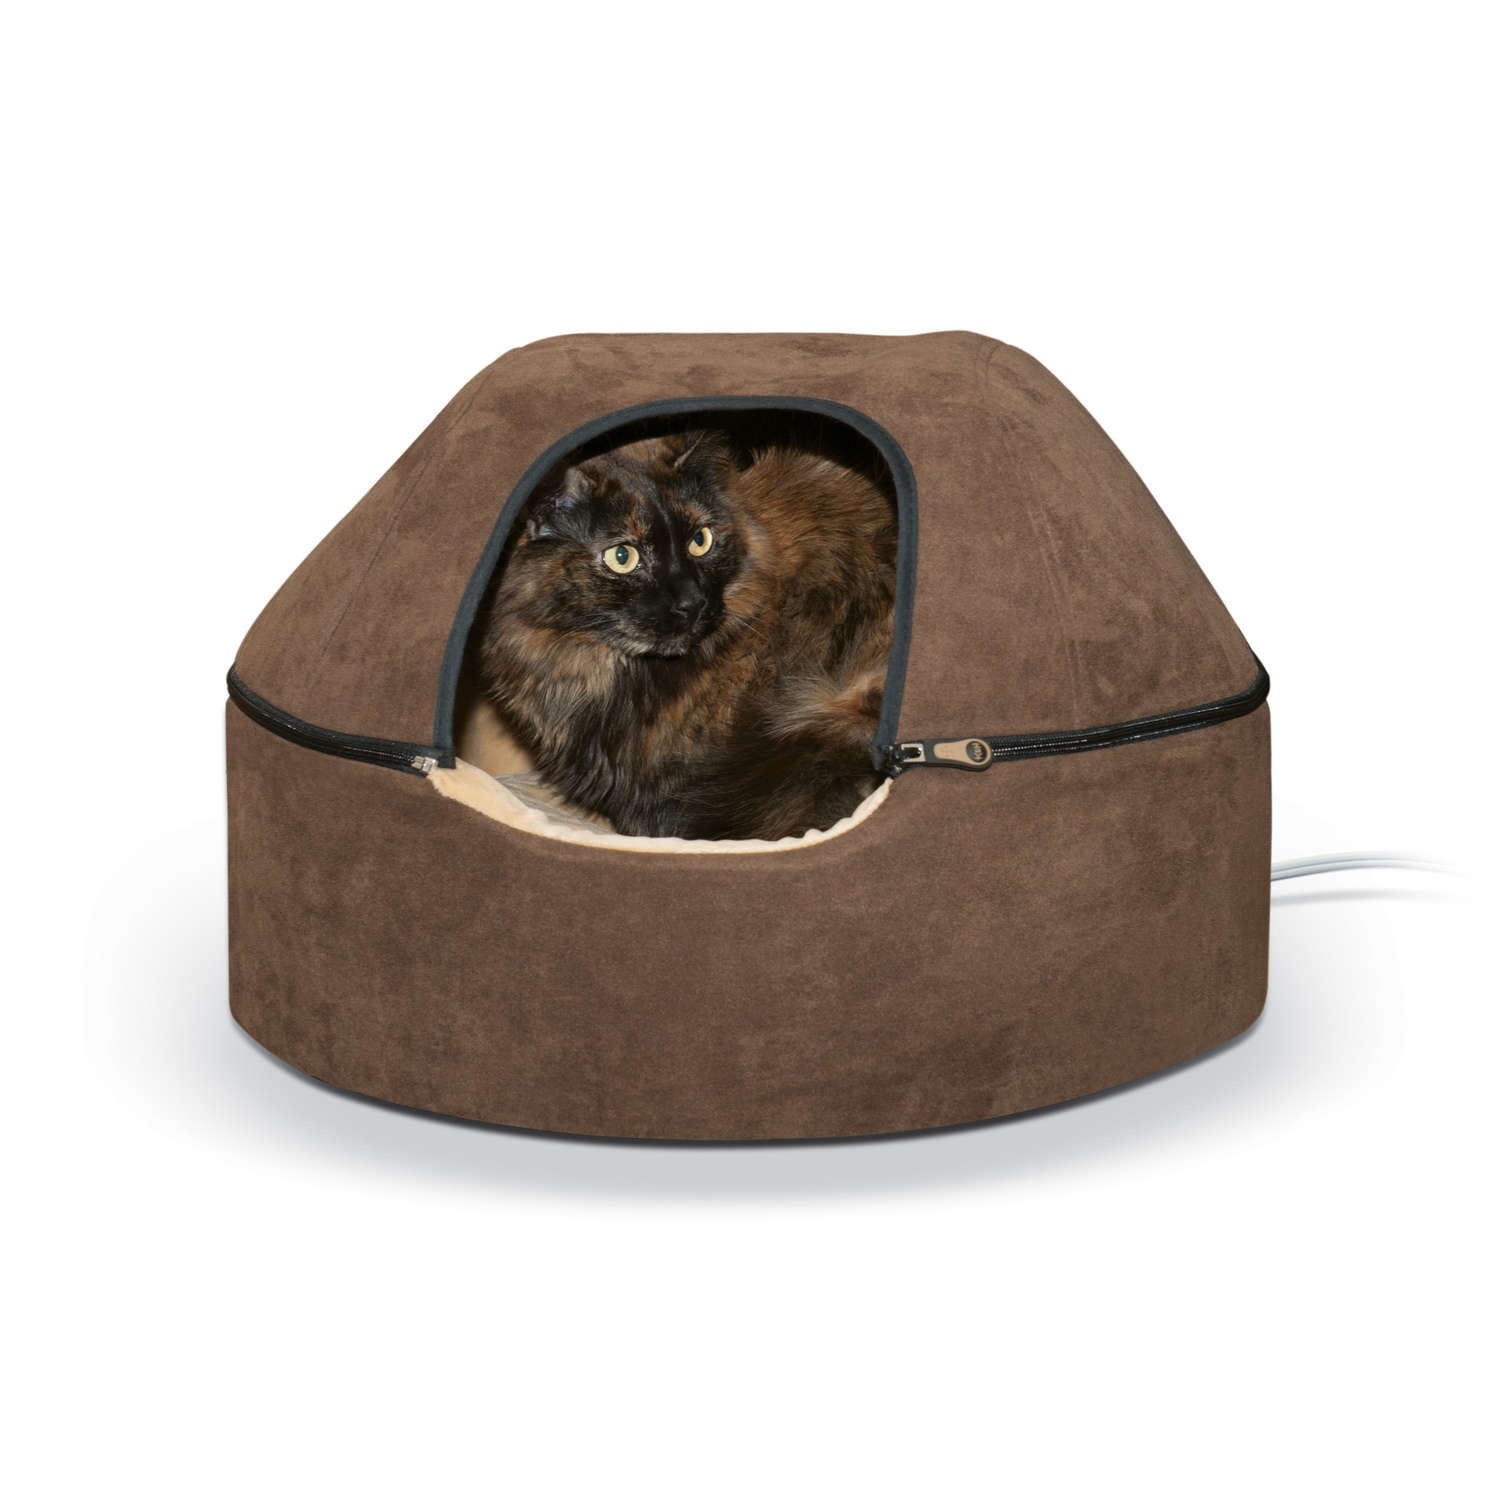 K&h Pet Products Kh3898 Kitty Dome Bed Heated